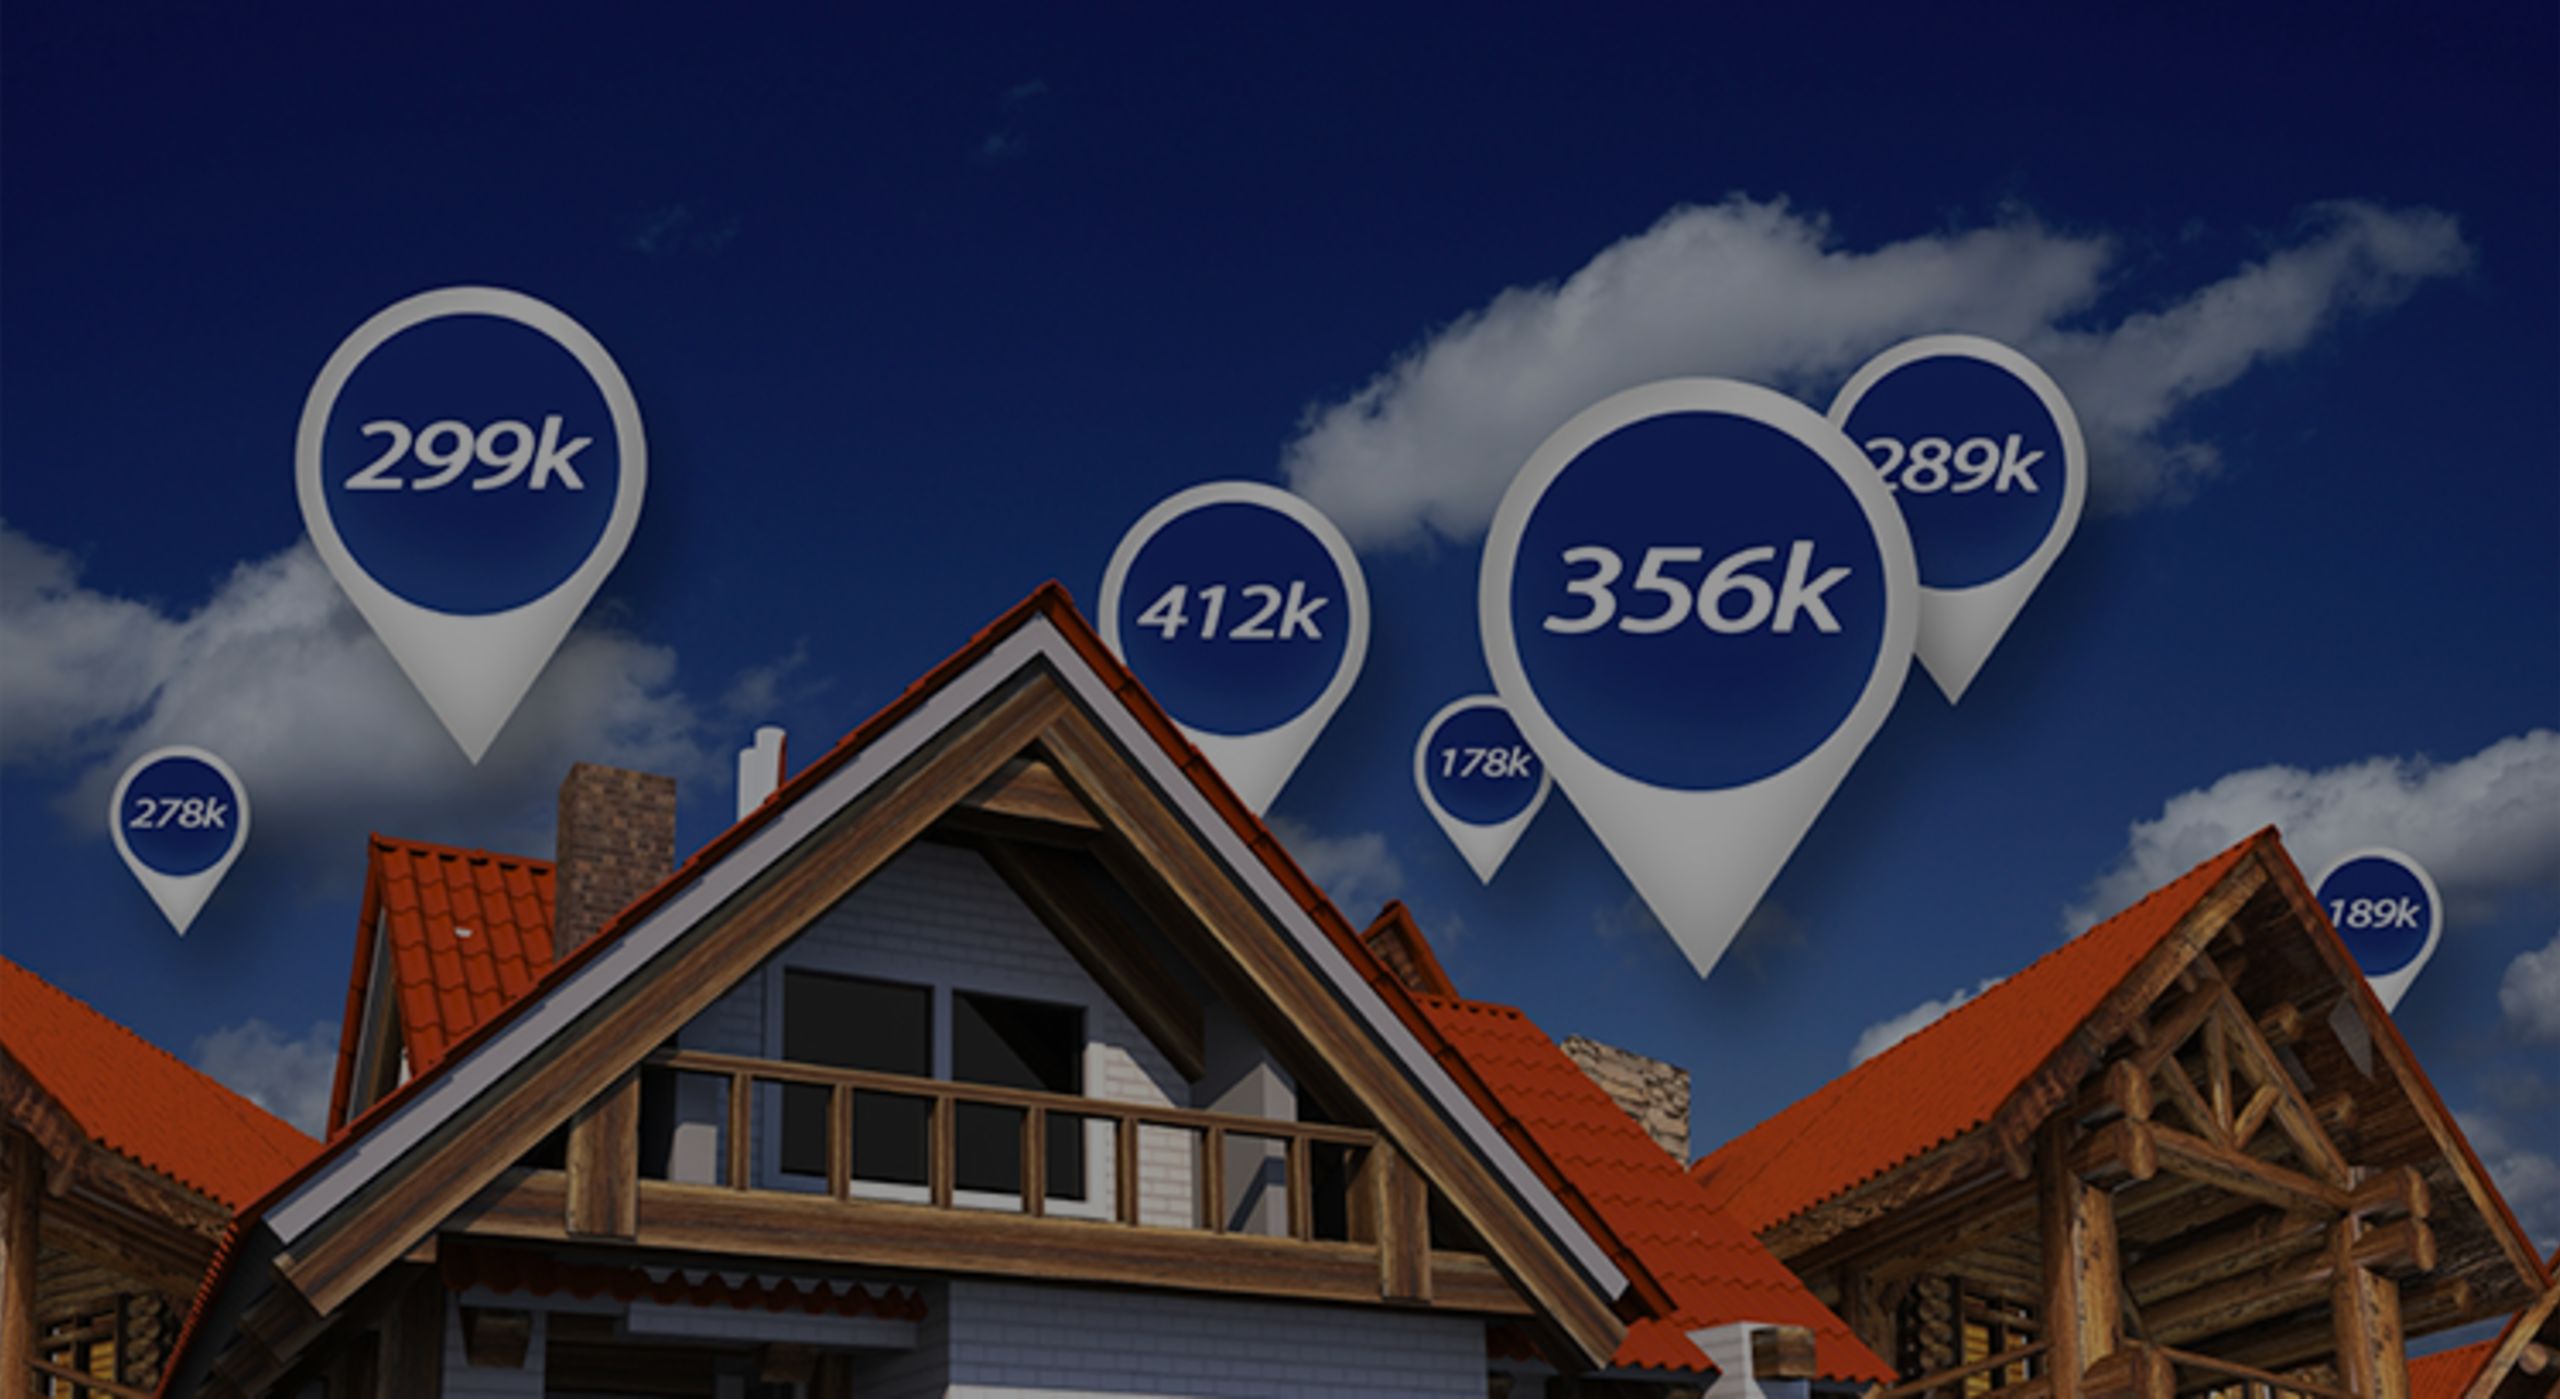 How Much Has Your Home Increased in Value?